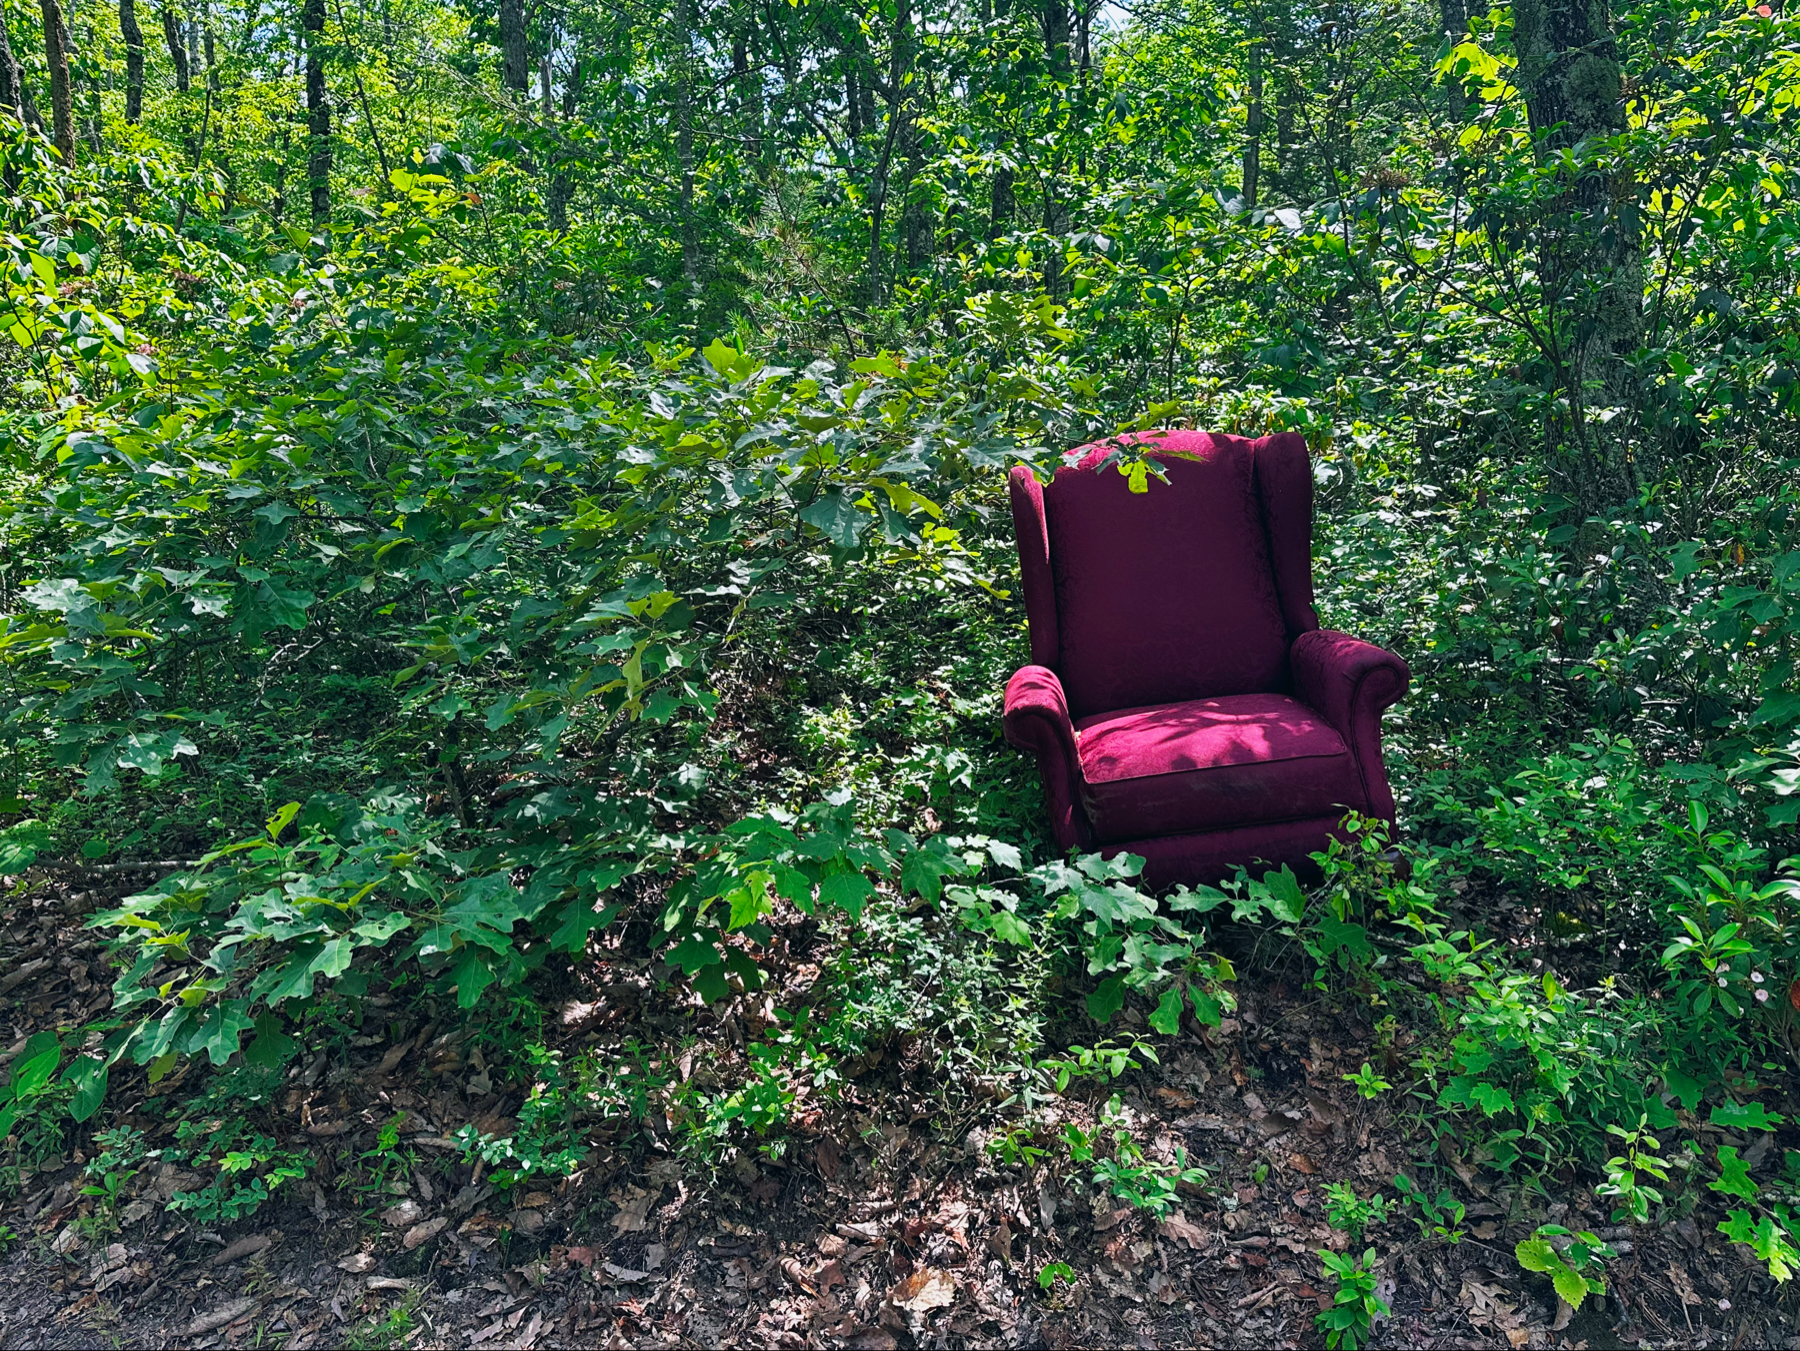 A recliner on the top of a mountain. Why?